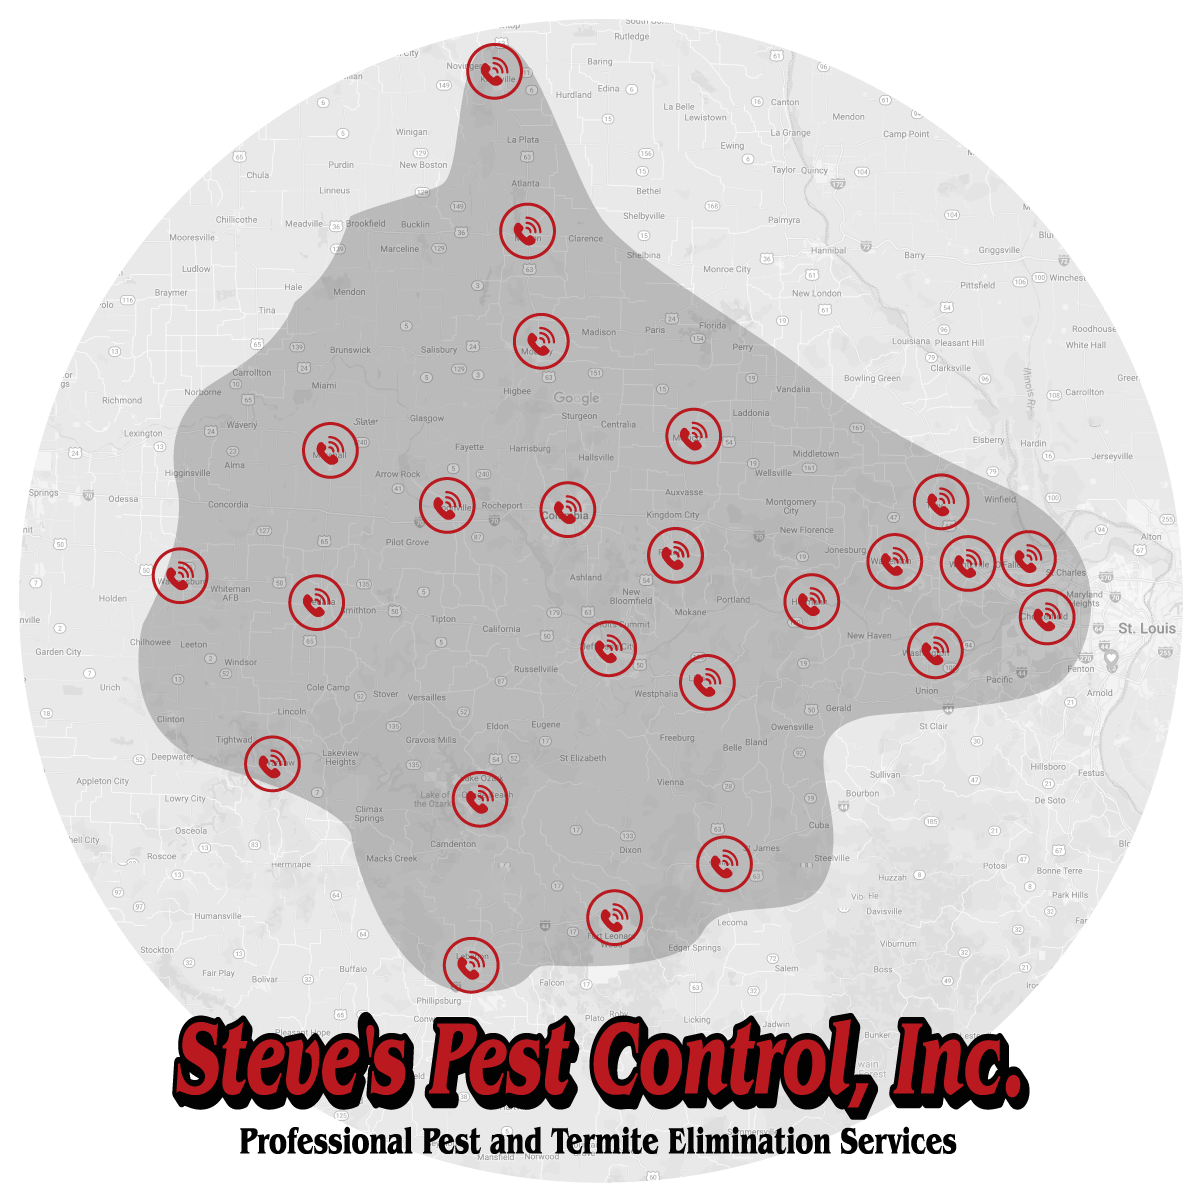 Steve's Pest Control Serves 18 Cities in the Mid-MO Area